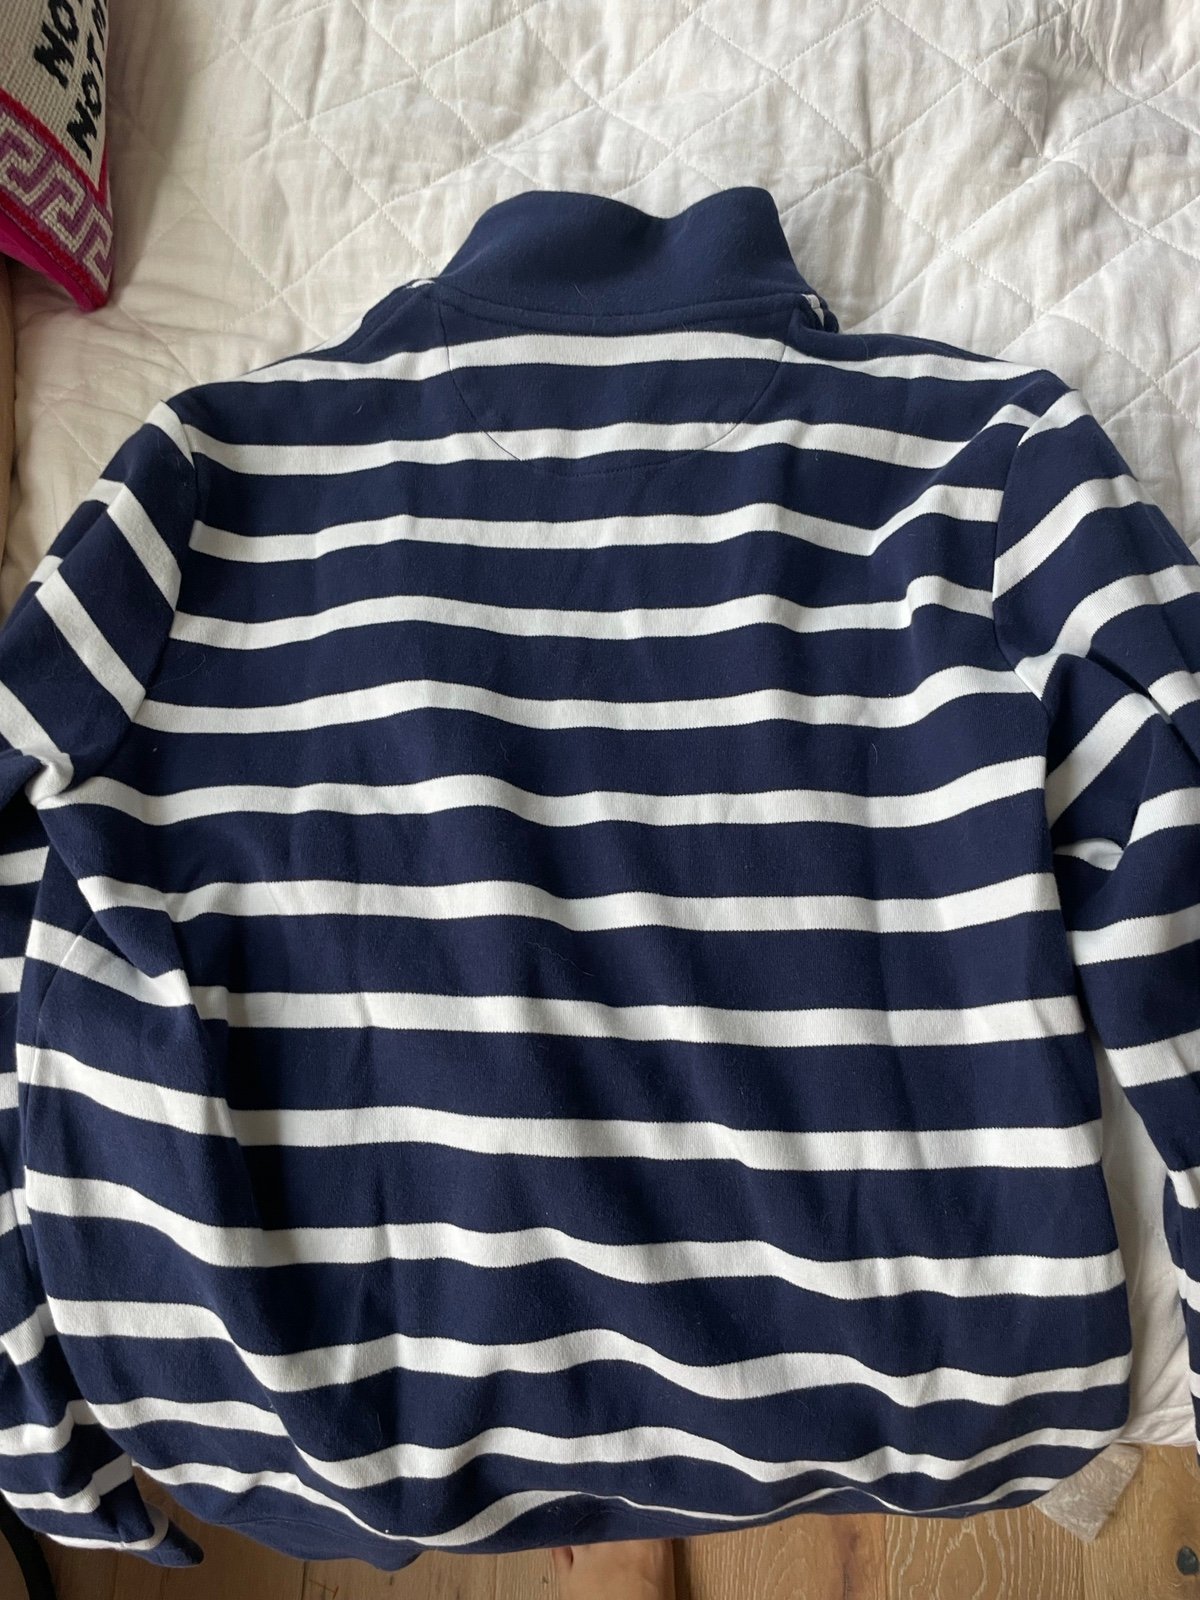 large selection vineyard vines pullover PgpdK8fwL Buying Cheap